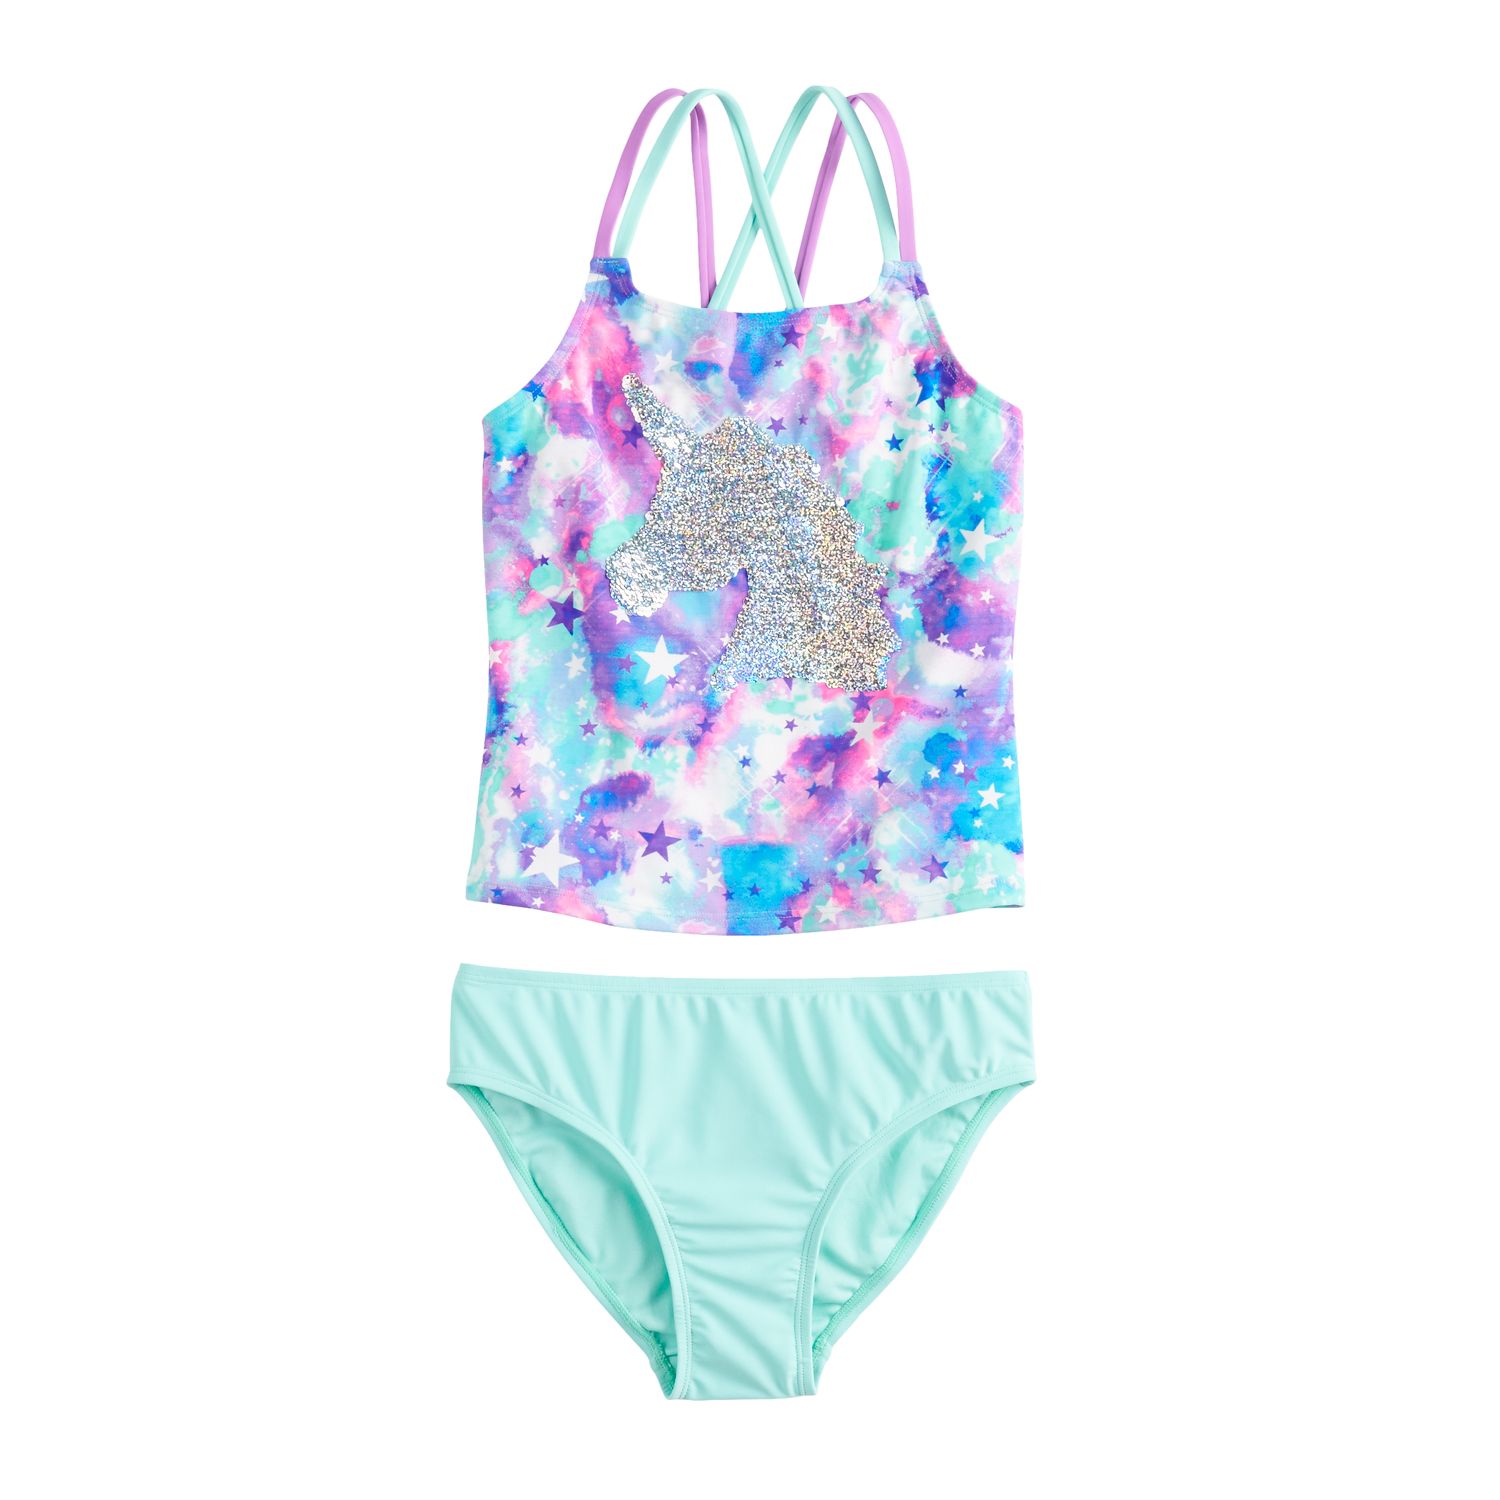 Girl's Swimsuits: Cute Sets, Shorts 